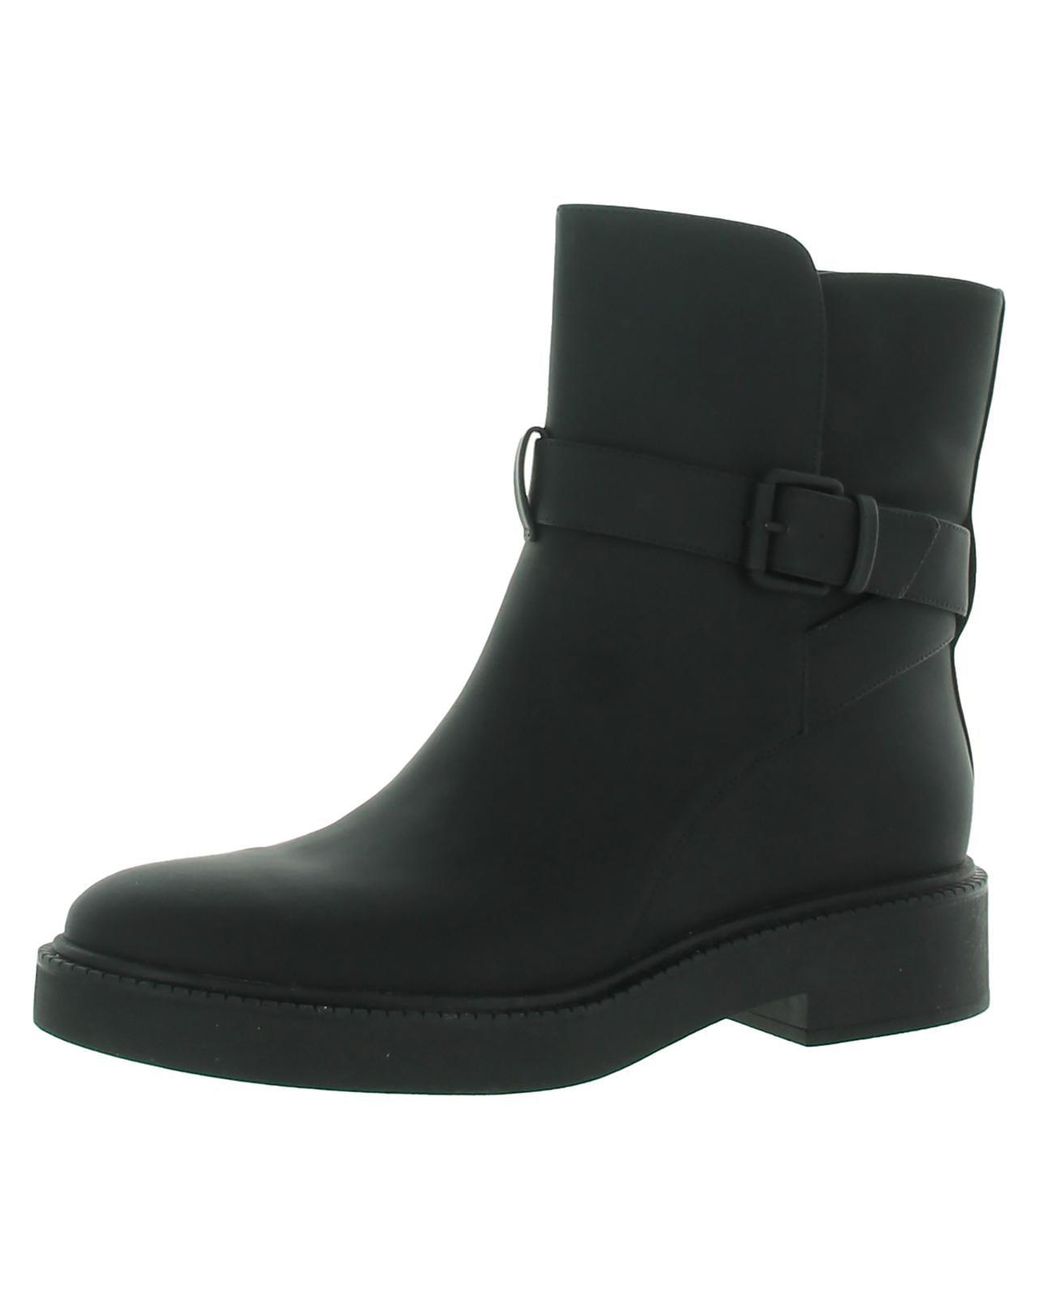 Vince Kaelyn Pull On Waterproof Ankle Boots in Black | Lyst